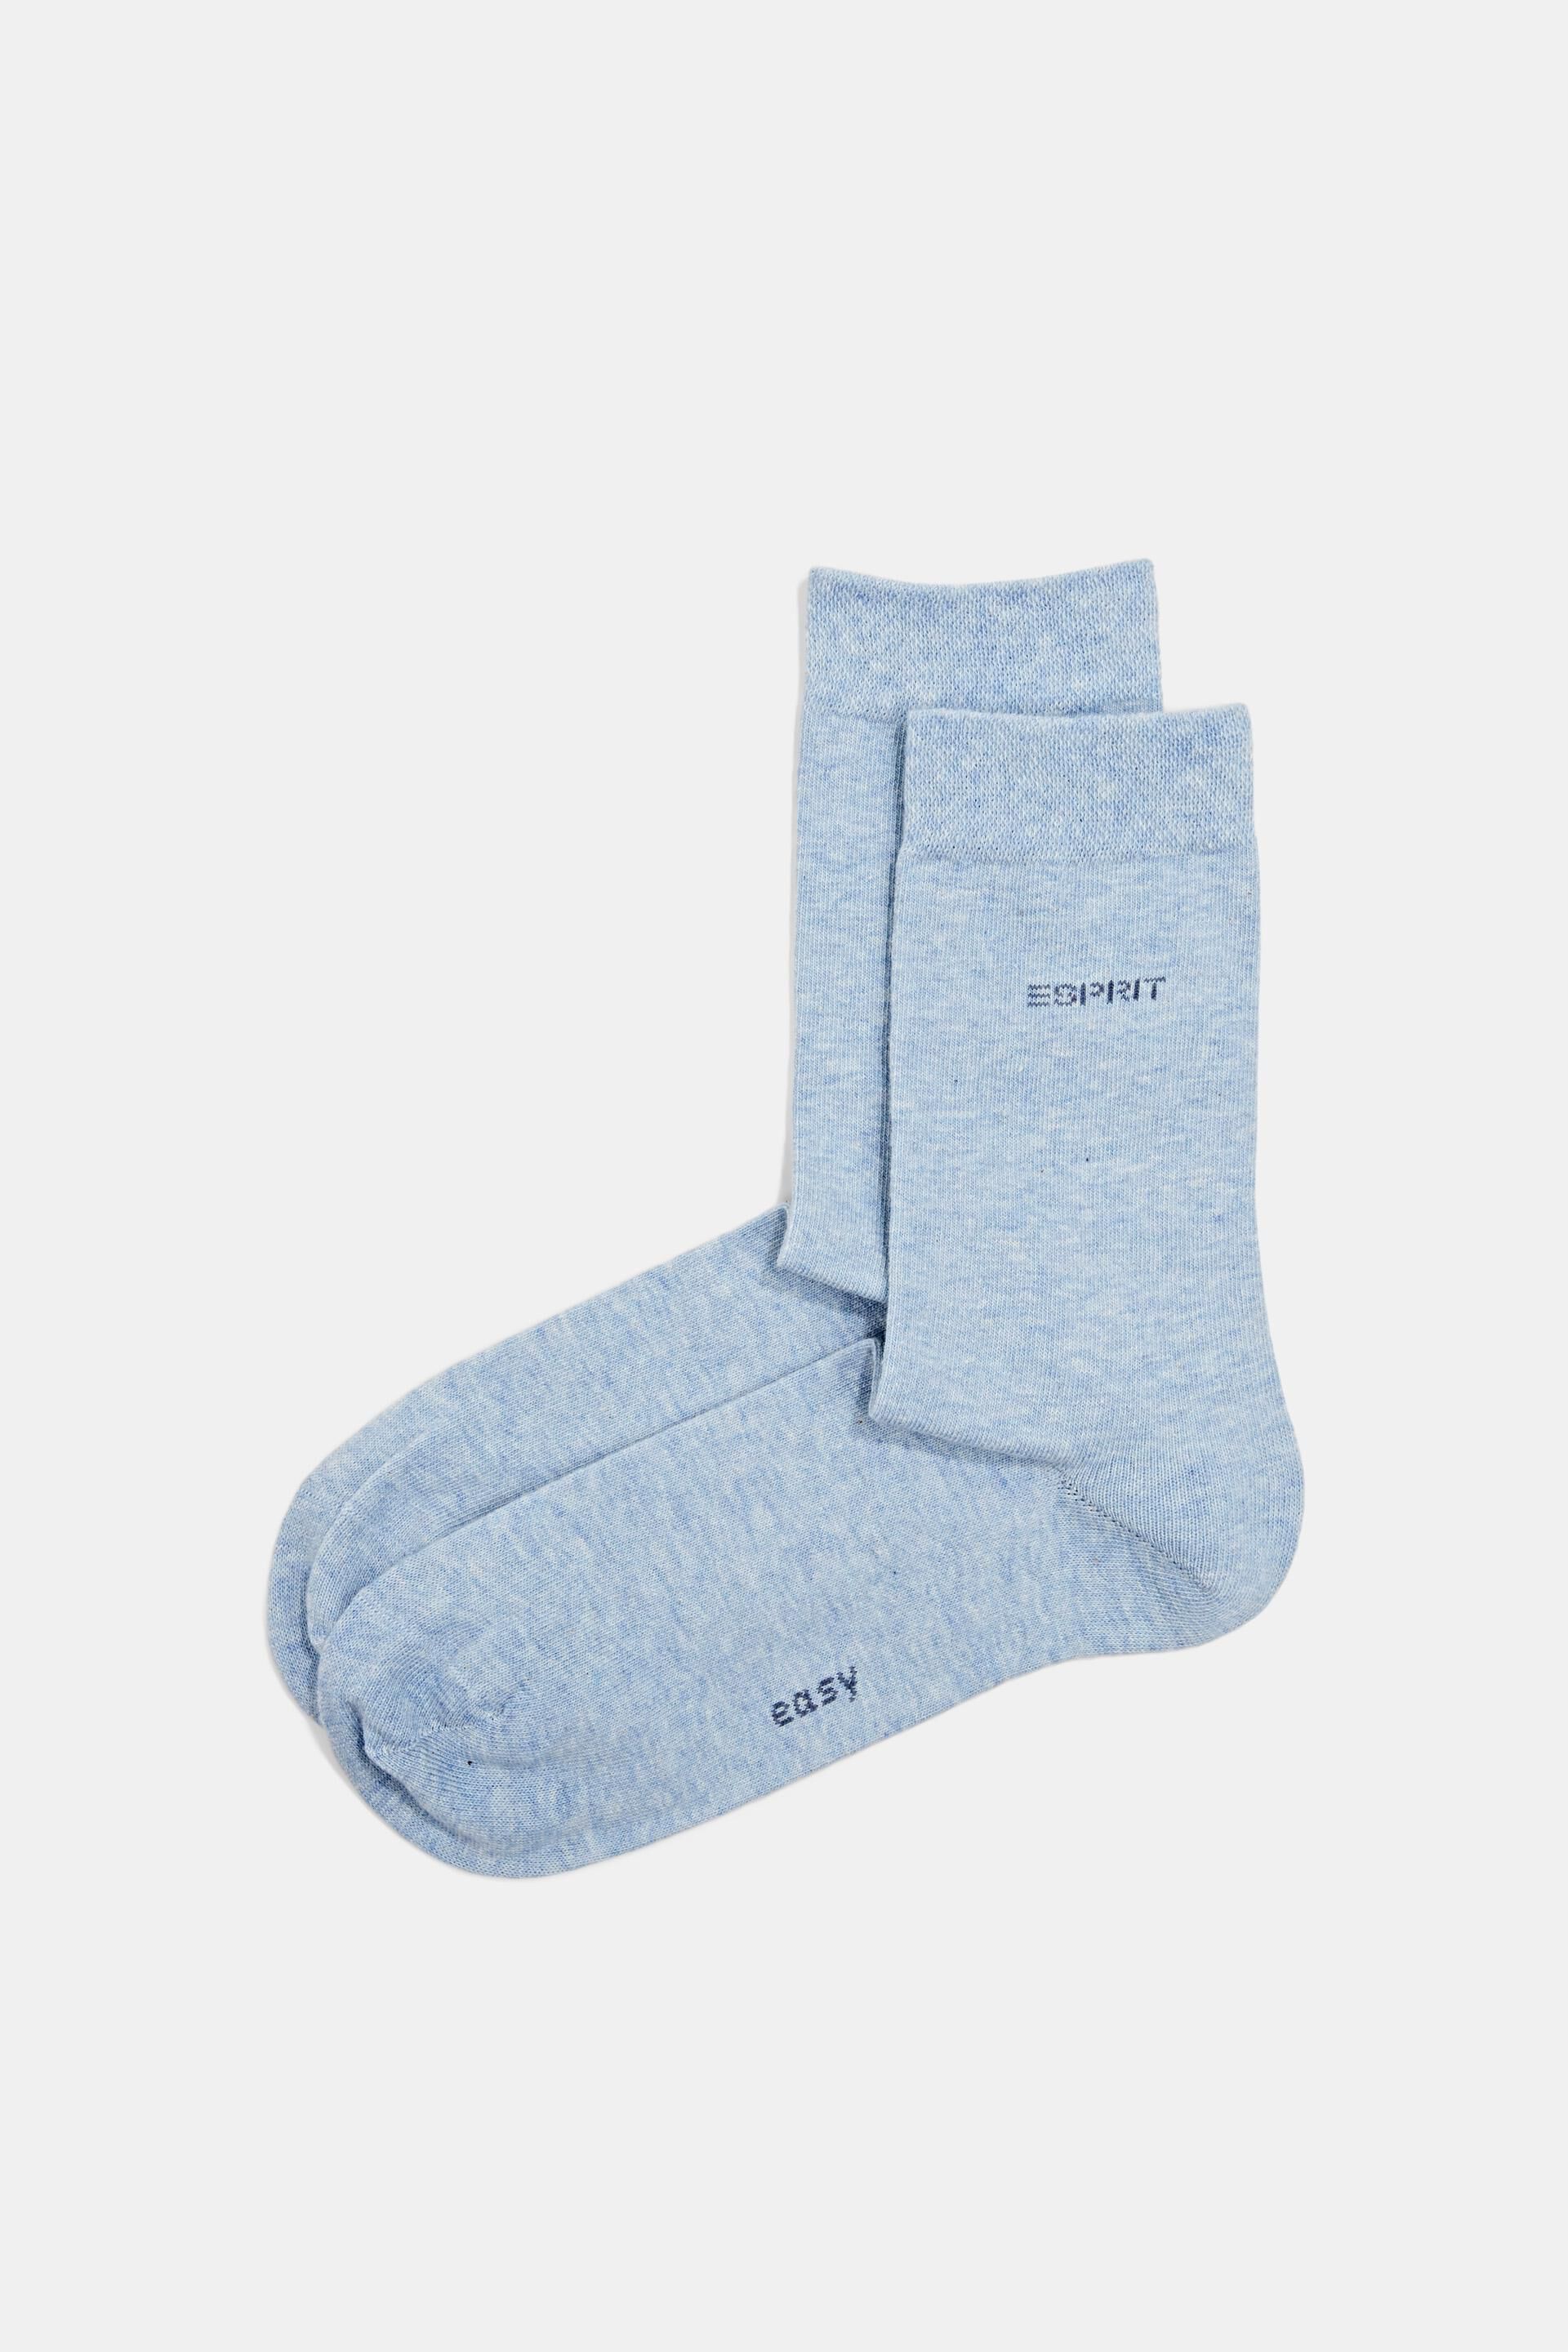 Esprit made pack of cotton Double organic socks blended